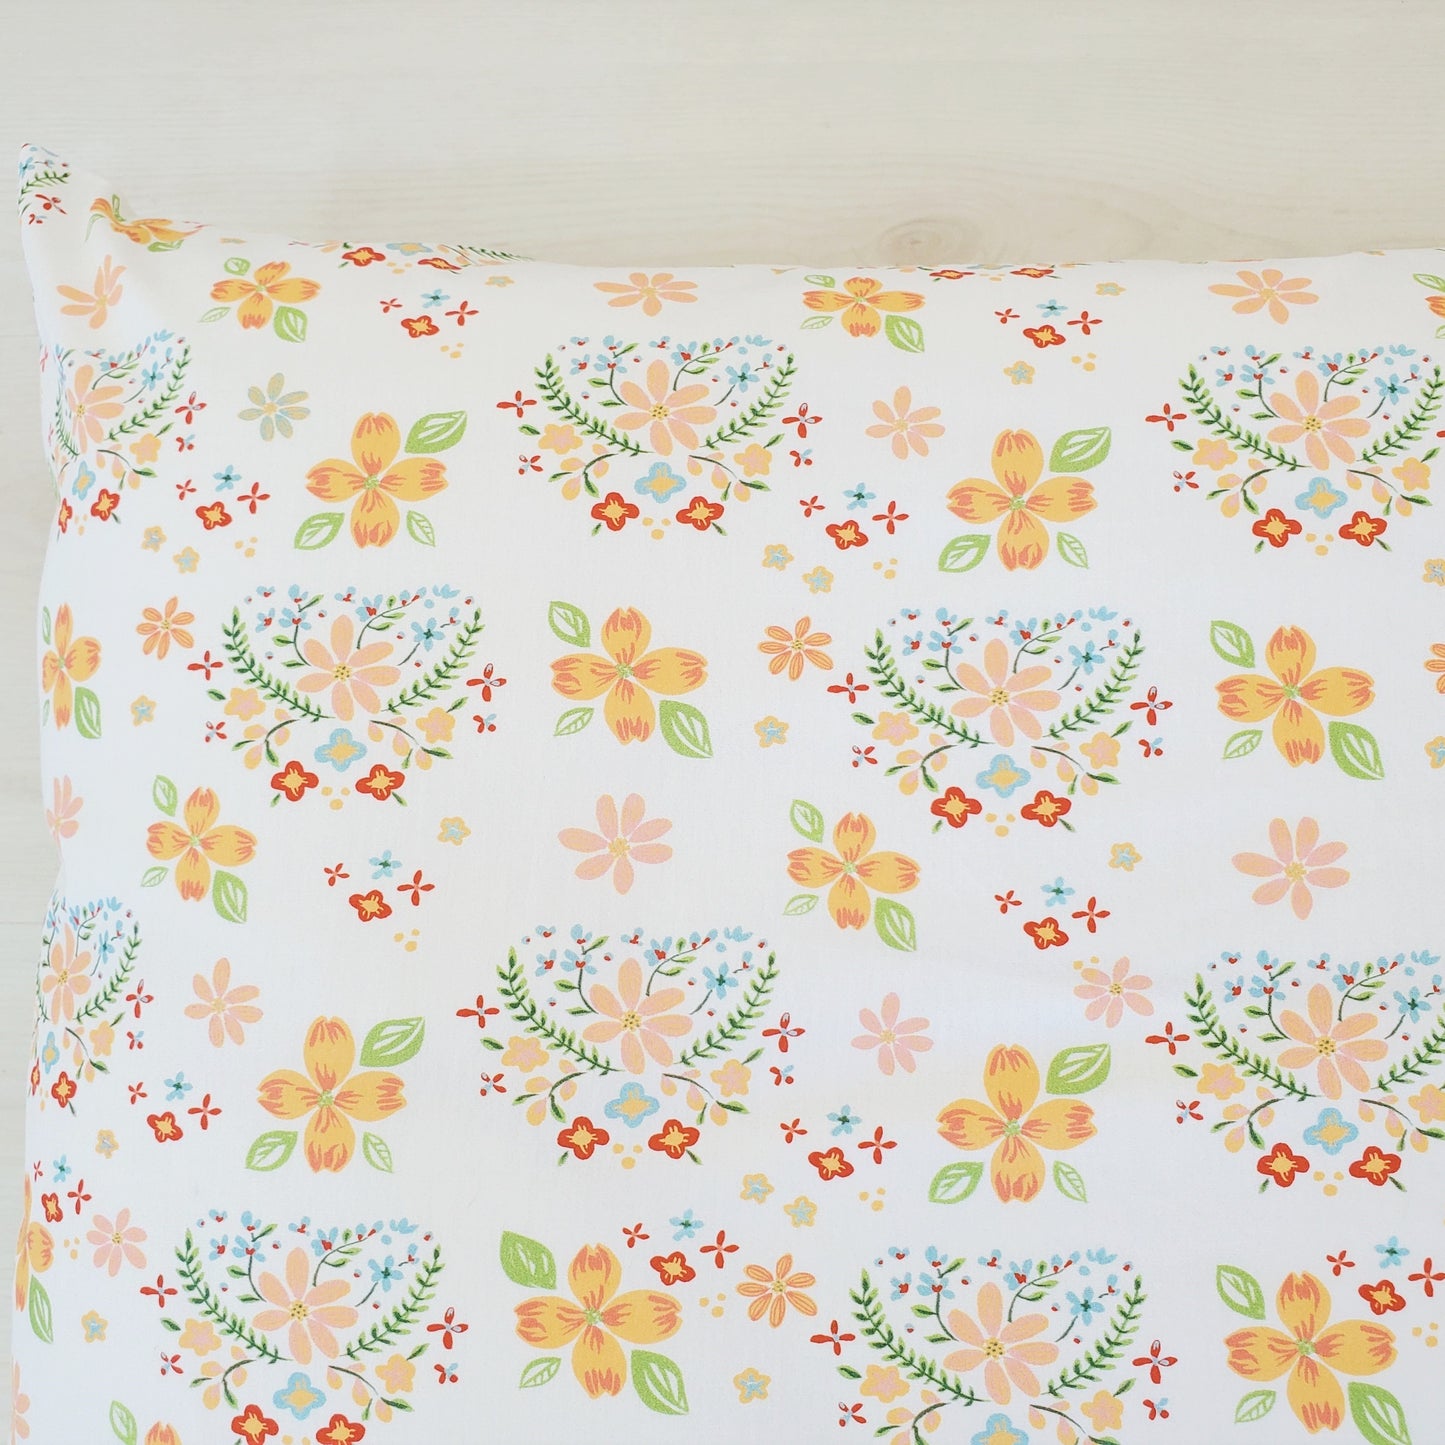 Organic Cotton Pillowcases in Floral Heart Print